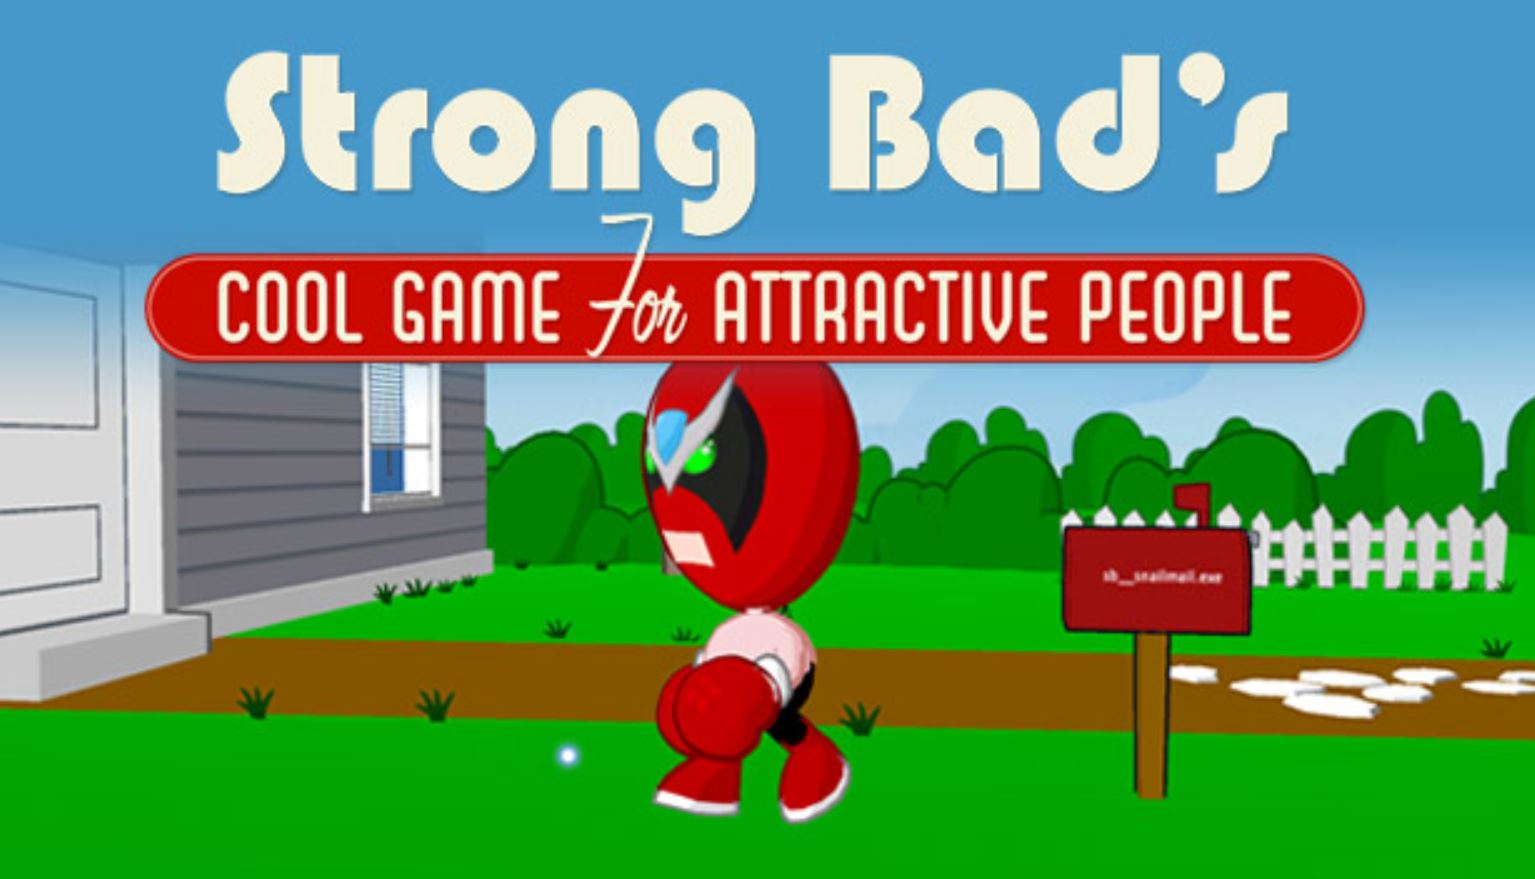 Strong Bad's videogame cover